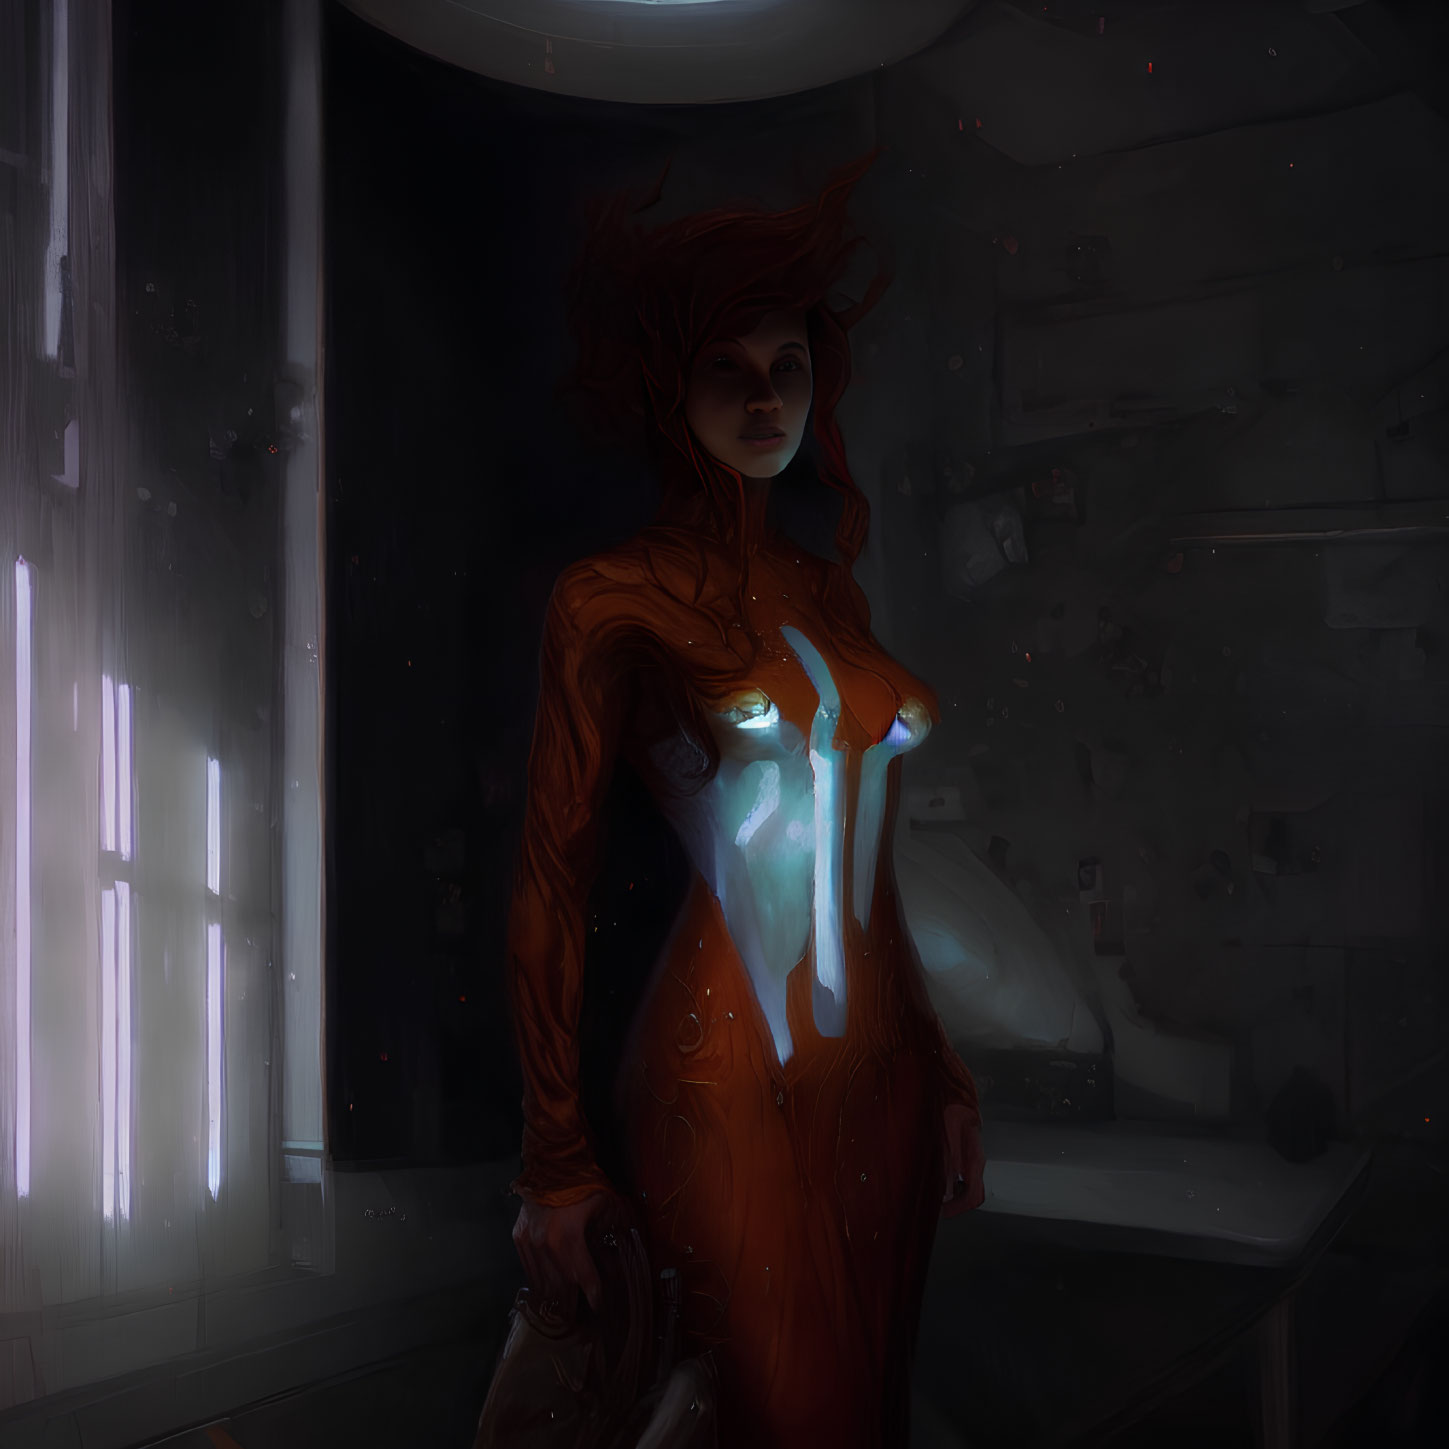 Red-haired character in futuristic orange suit in dark room with blue lights and floating debris